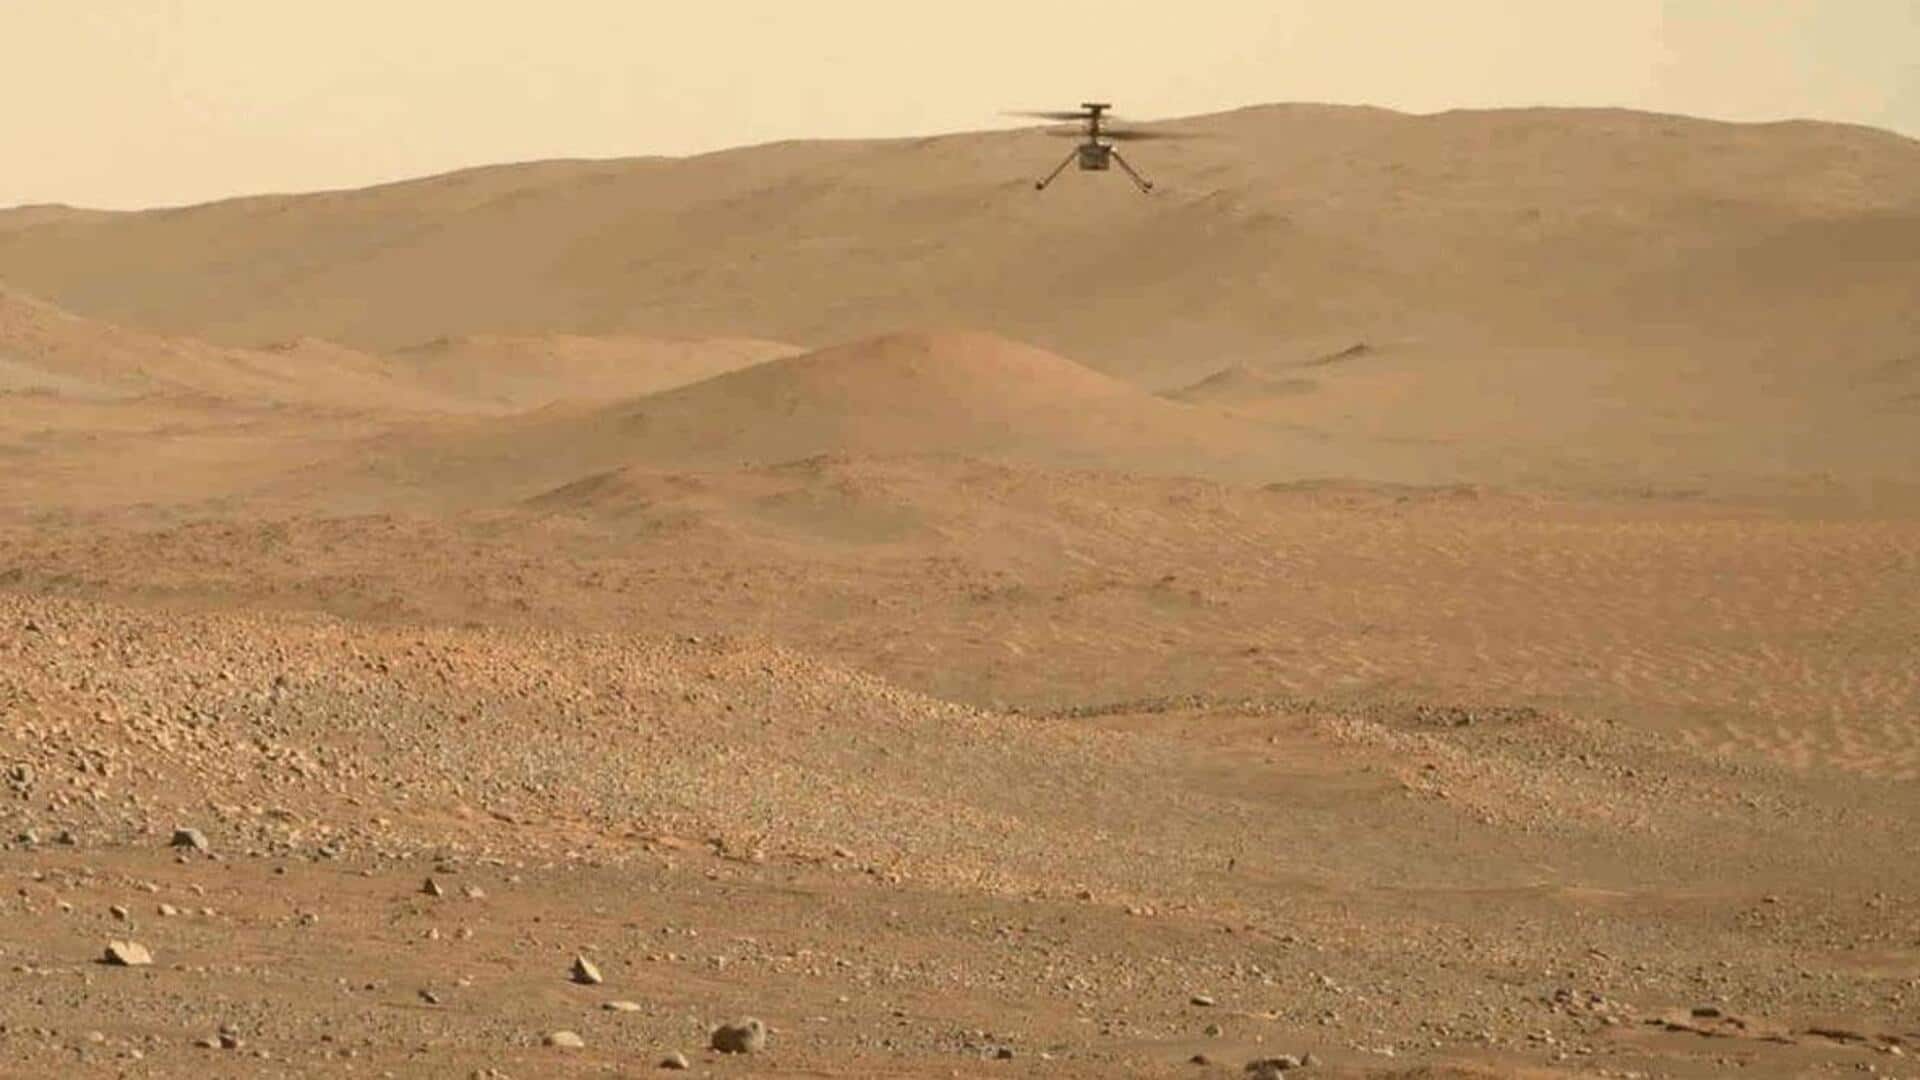 NASA's Ingenuity Mars Helicopter sets new distance record